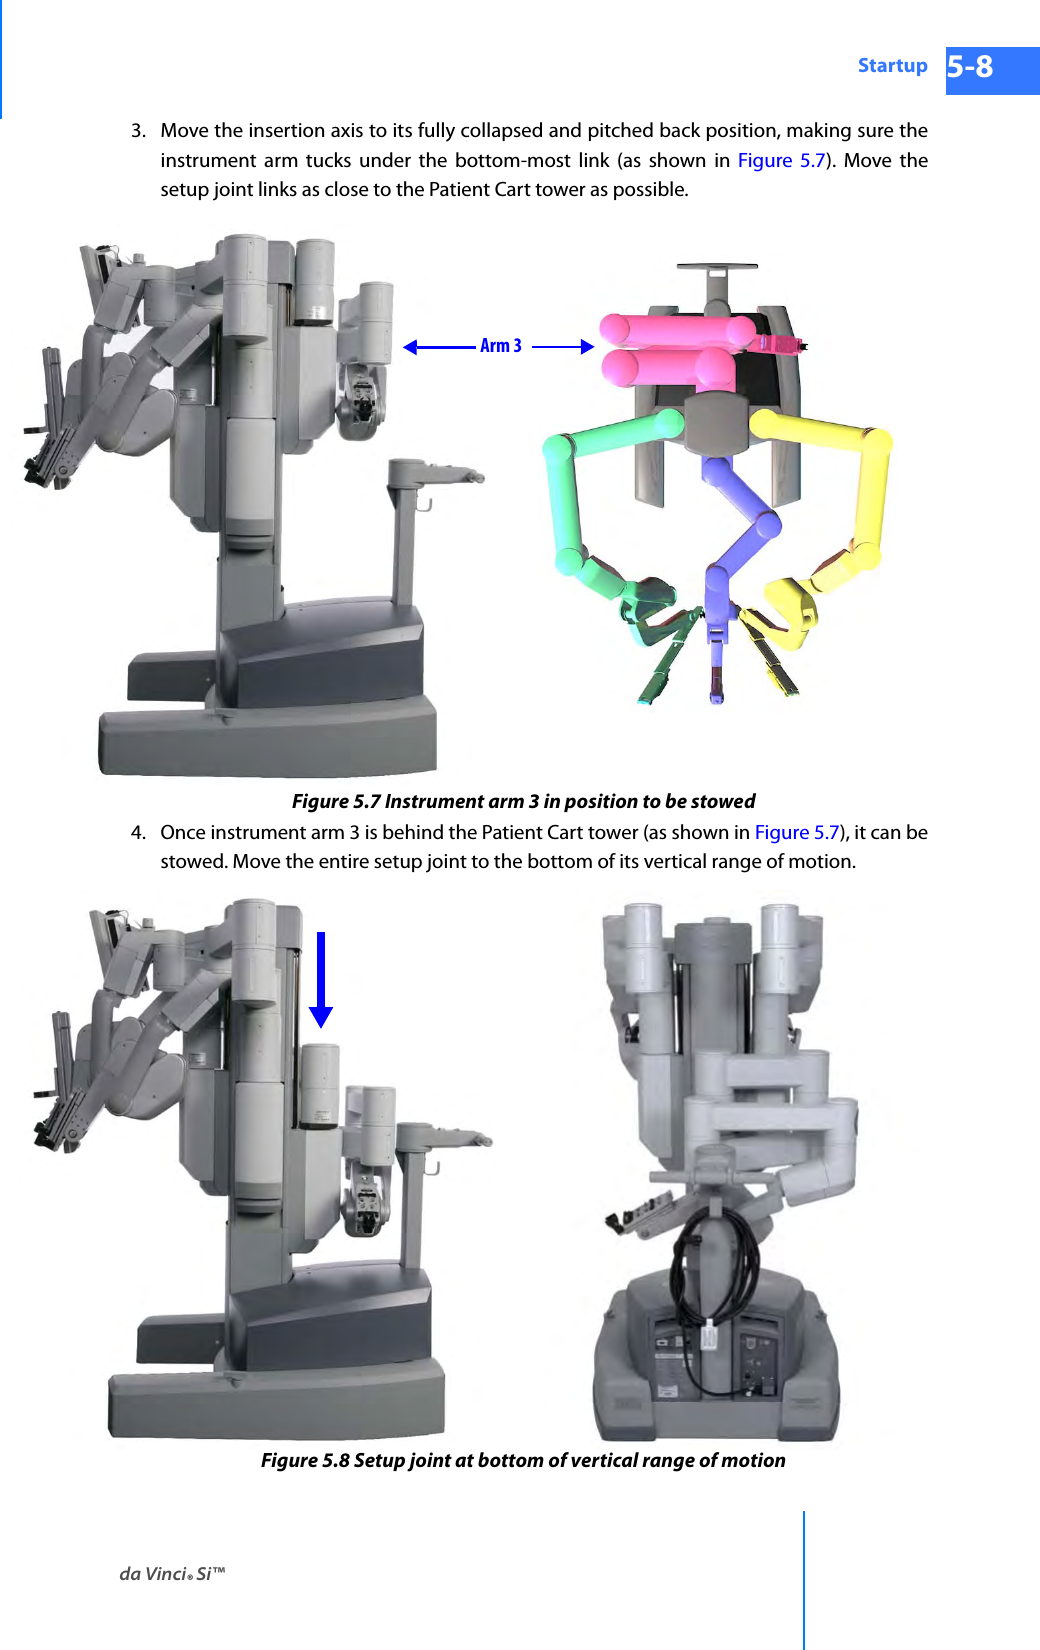 da Vinci® Si™Startup 5-8DRAFT/PRE-RELEASE/CONFIDENTIAL 10/9/143. Move the insertion axis to its fully collapsed and pitched back position, making sure the instrument arm tucks under the bottom-most link (as shown in Figure 5.7). Move the setup joint links as close to the Patient Cart tower as possible.Figure 5.7 Instrument arm 3 in position to be stowed4. Once instrument arm 3 is behind the Patient Cart tower (as shown in Figure 5.7), it can be stowed. Move the entire setup joint to the bottom of its vertical range of motion.Figure 5.8 Setup joint at bottom of vertical range of motionArm 3